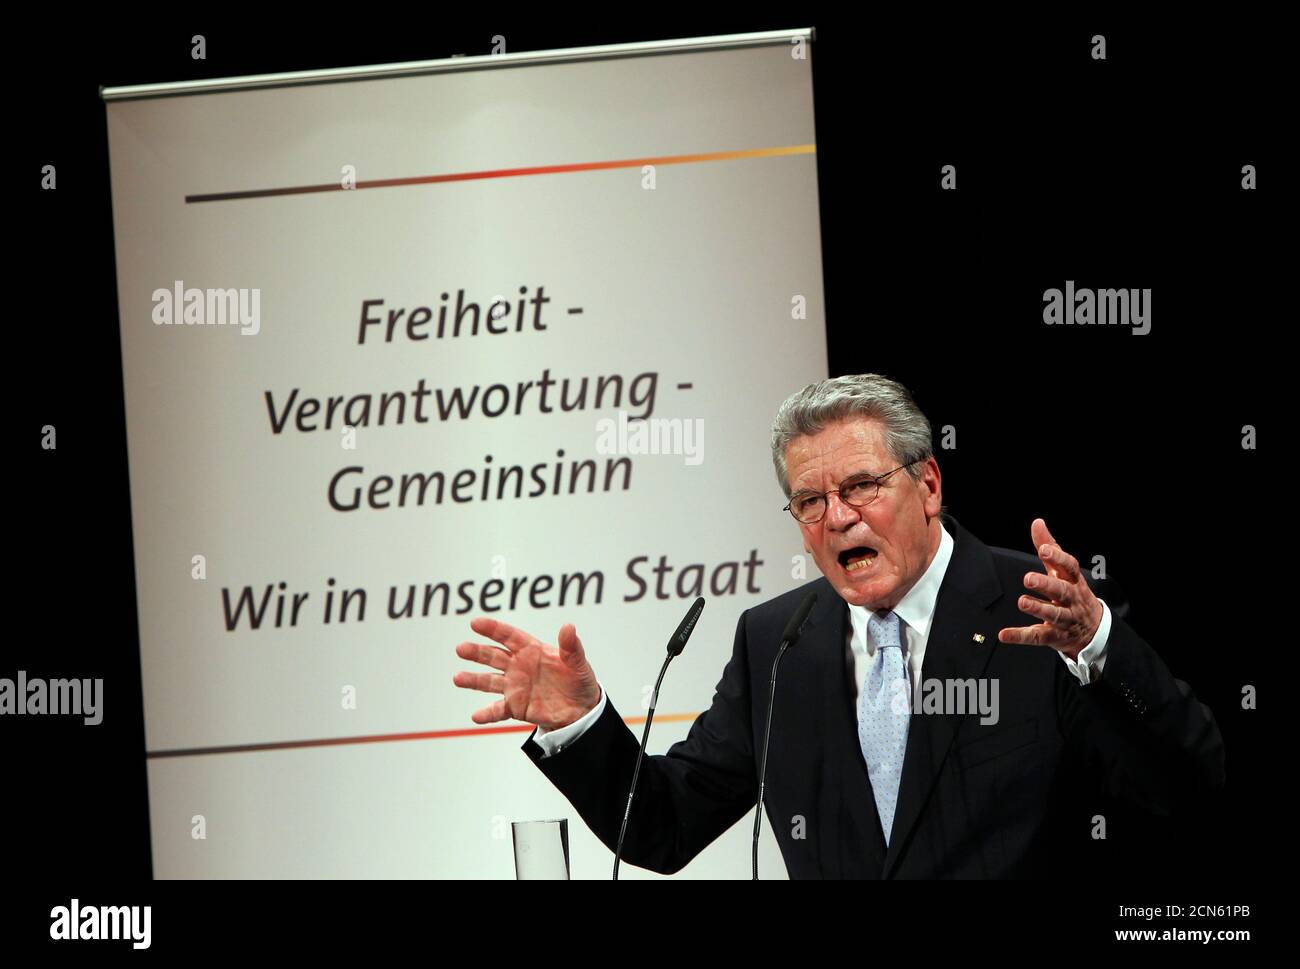 German presidential candidate Joachim Gauck delivers a speech in the Deutsches Theater (German Theatre) in Berlin, June 22, 2010. The vote for the largely ceremonial post is shaping up as a big test for Chancellor Angela Merkel who has been dogged by falling popularity, policy spats in her centre-right coalition and accusations of weak leadership. A failure by Merkel to push through the conservative candidate Christian Wulff, the premier of the state of Lower Saxony, would be widely viewed as a major defeat for her. Joachim Gauck, a former Protestant pastor who played an important role in the  Stock Photo